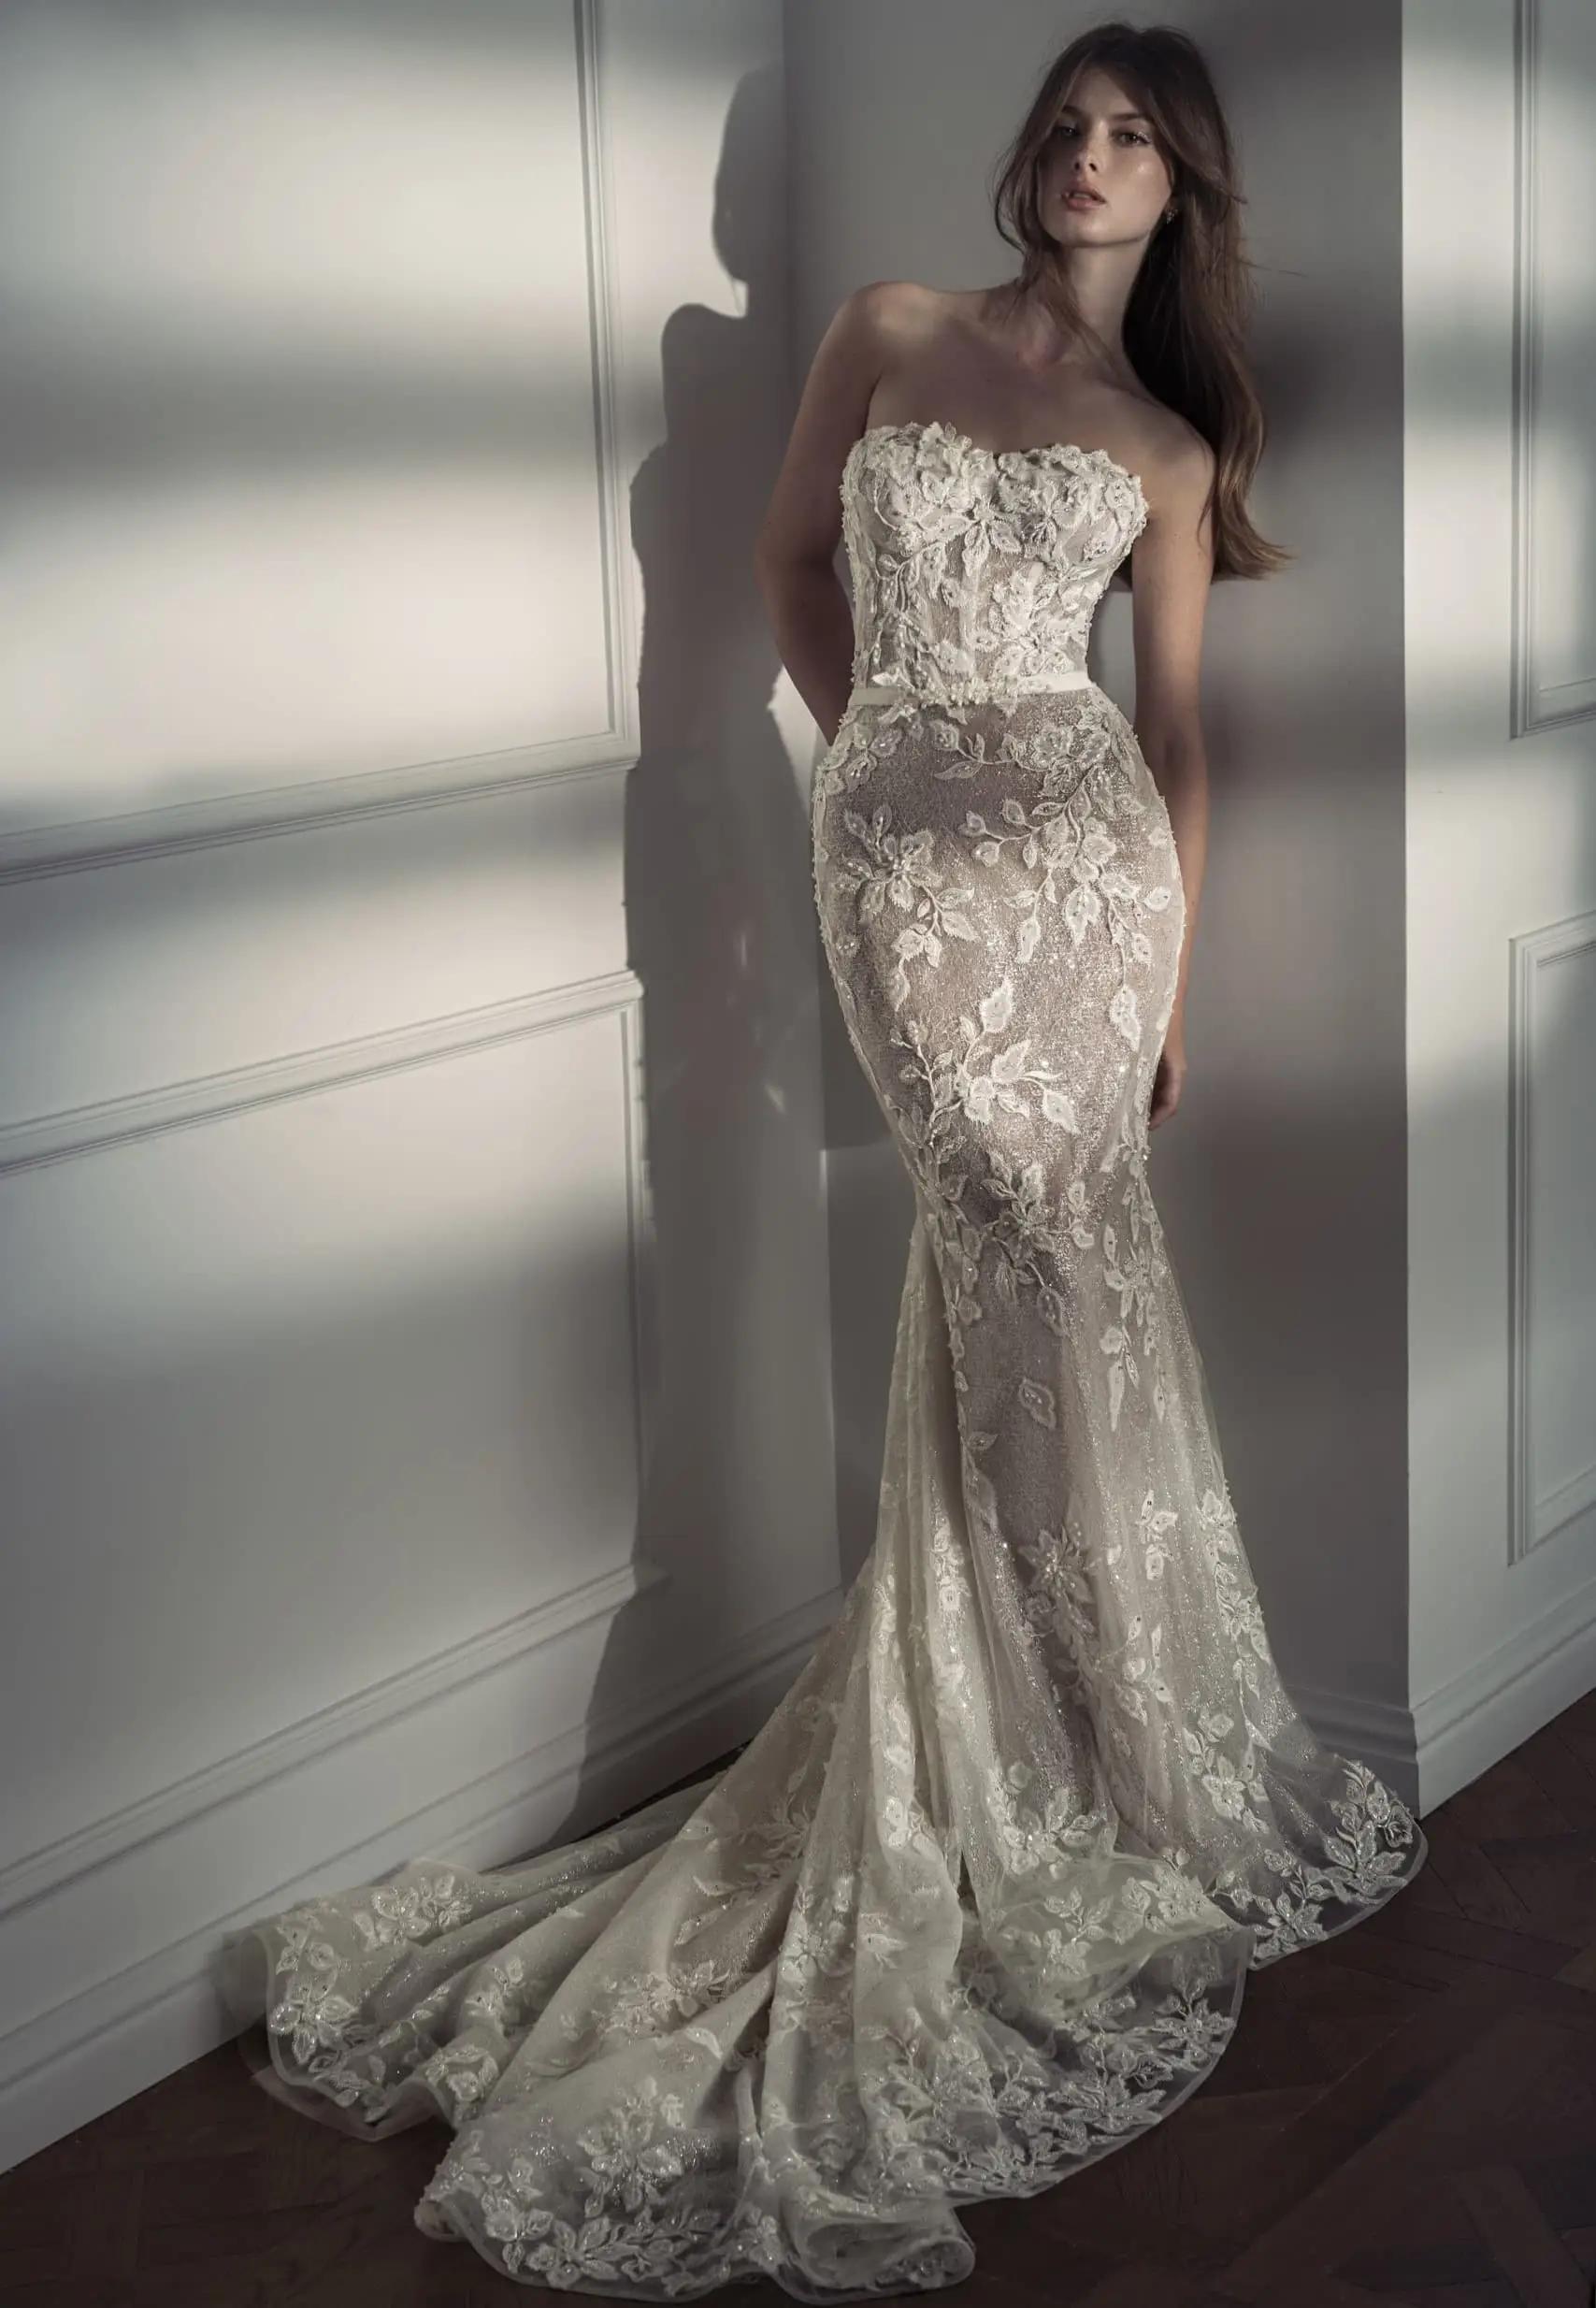 Model wearing a white gown by dany tabet